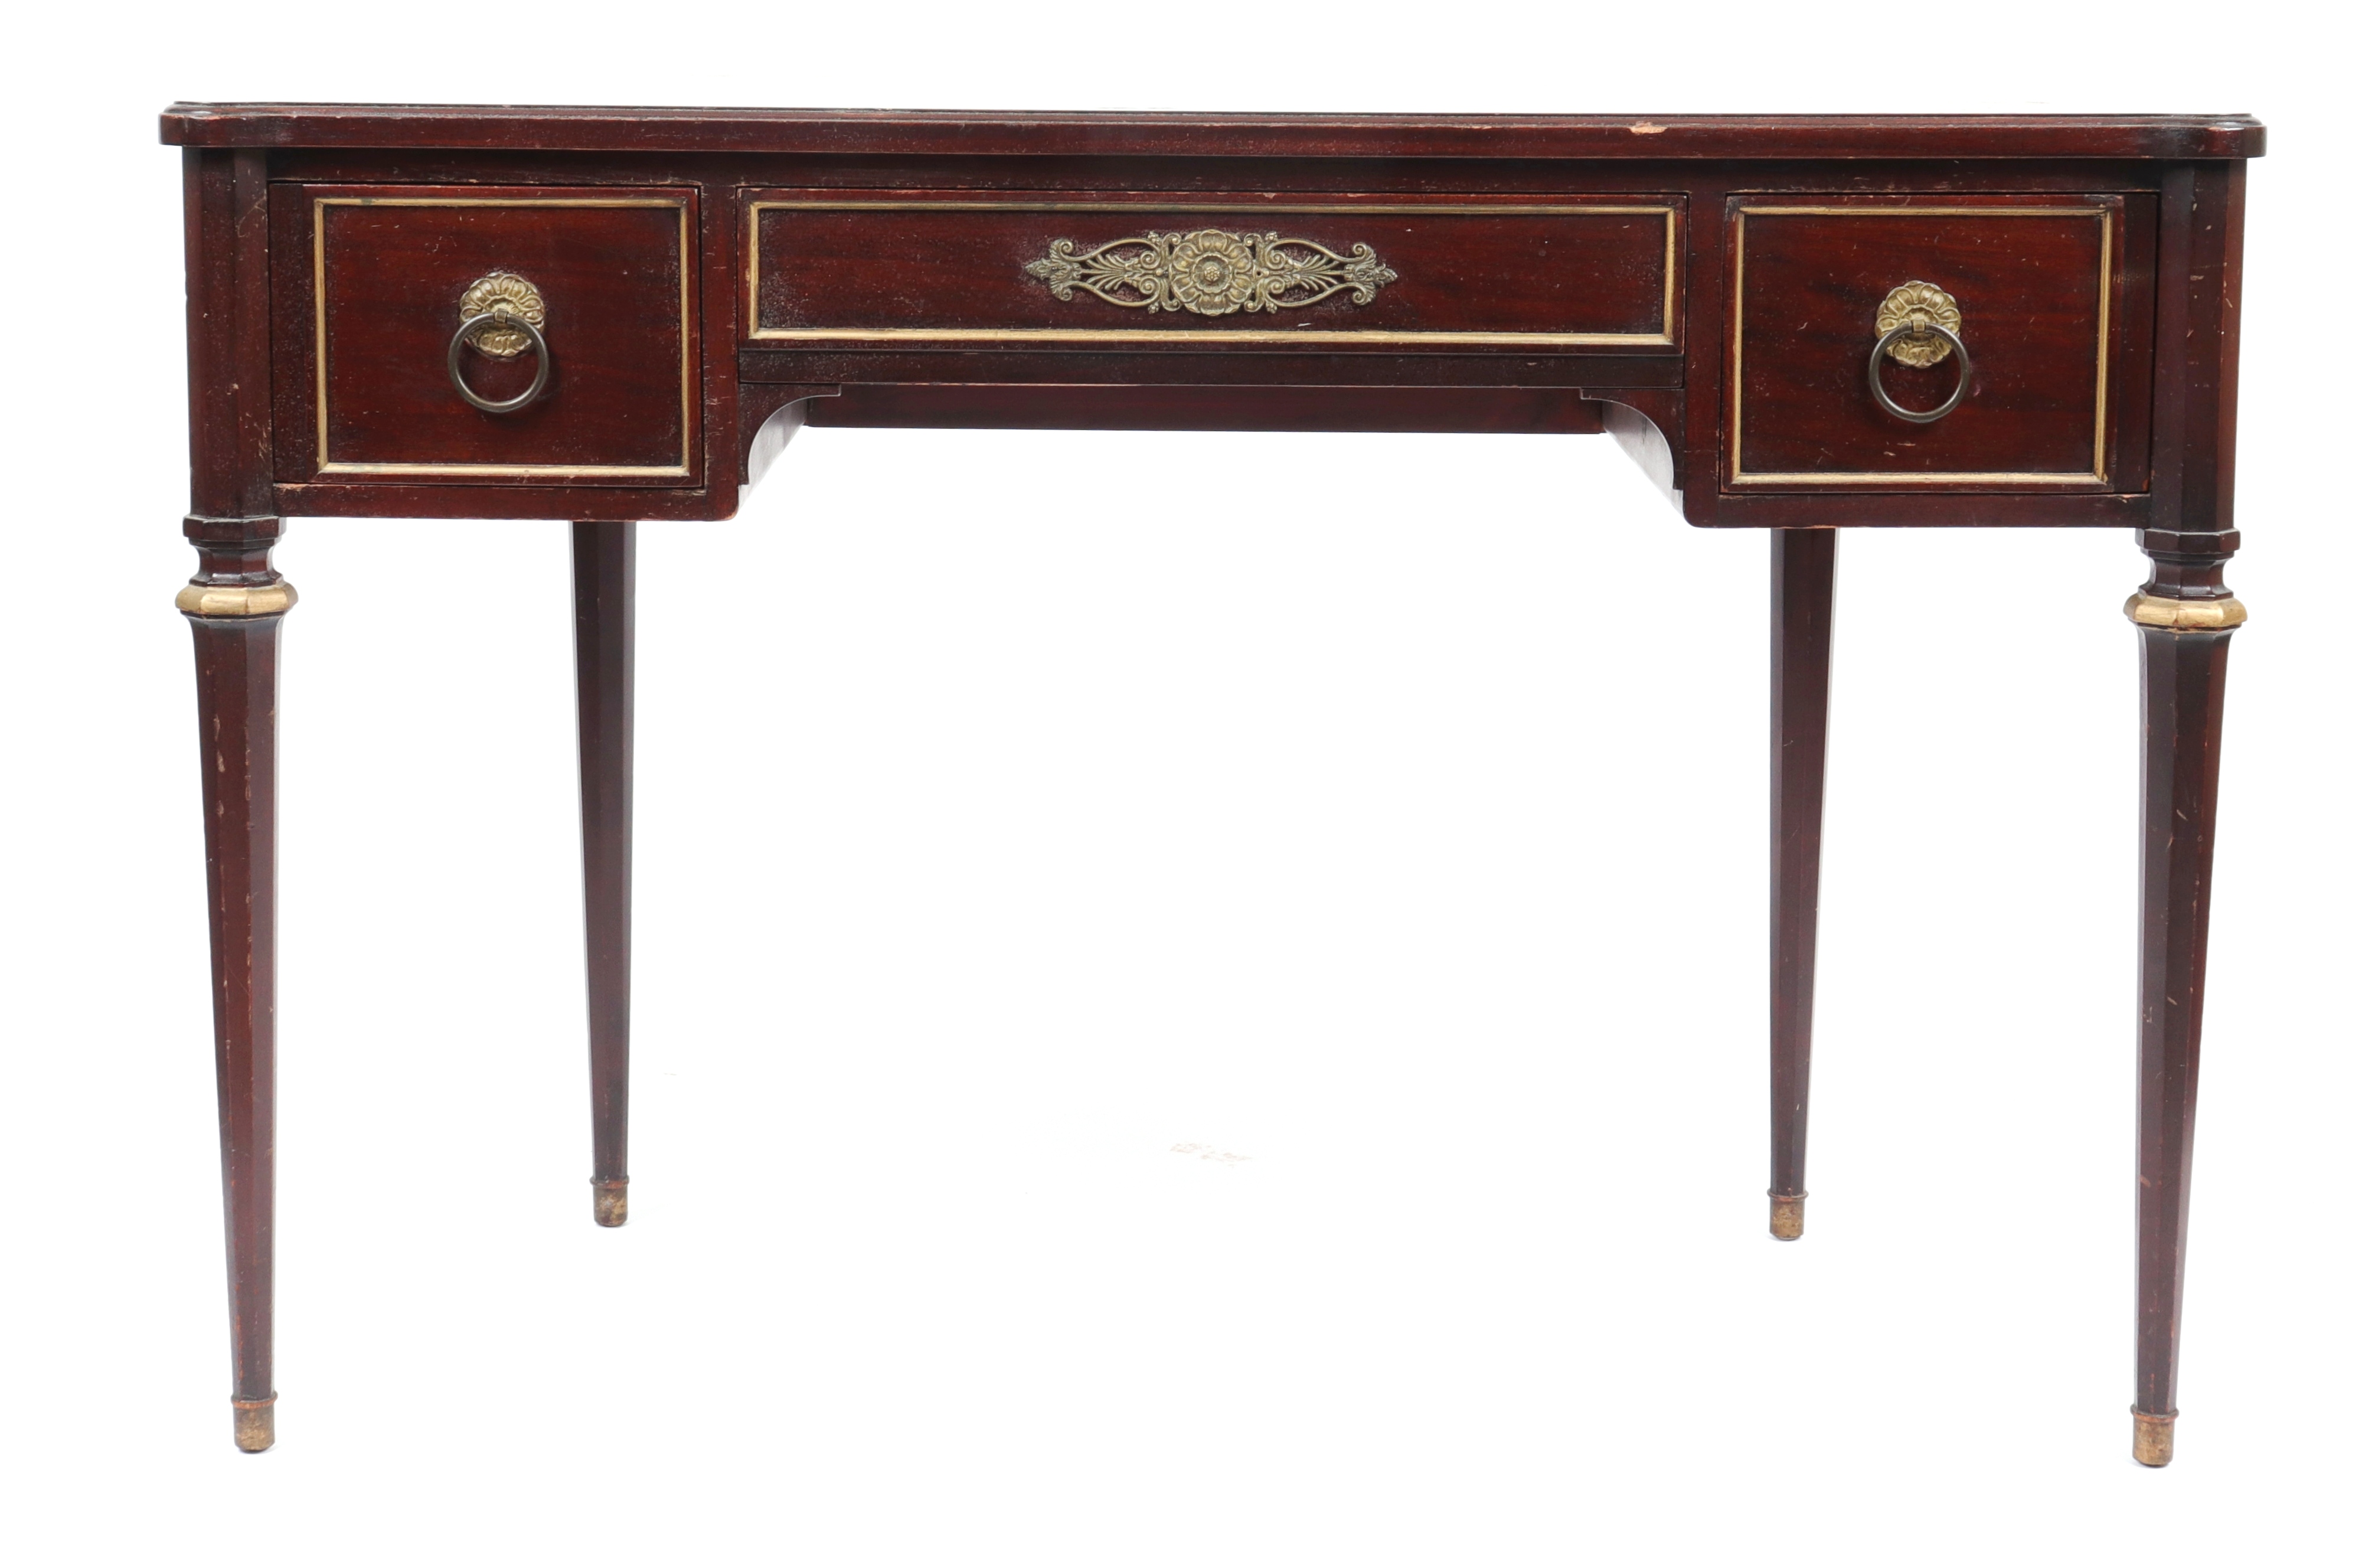 FRENCH EMPIRE STYLE WRITING DESK 3c532d